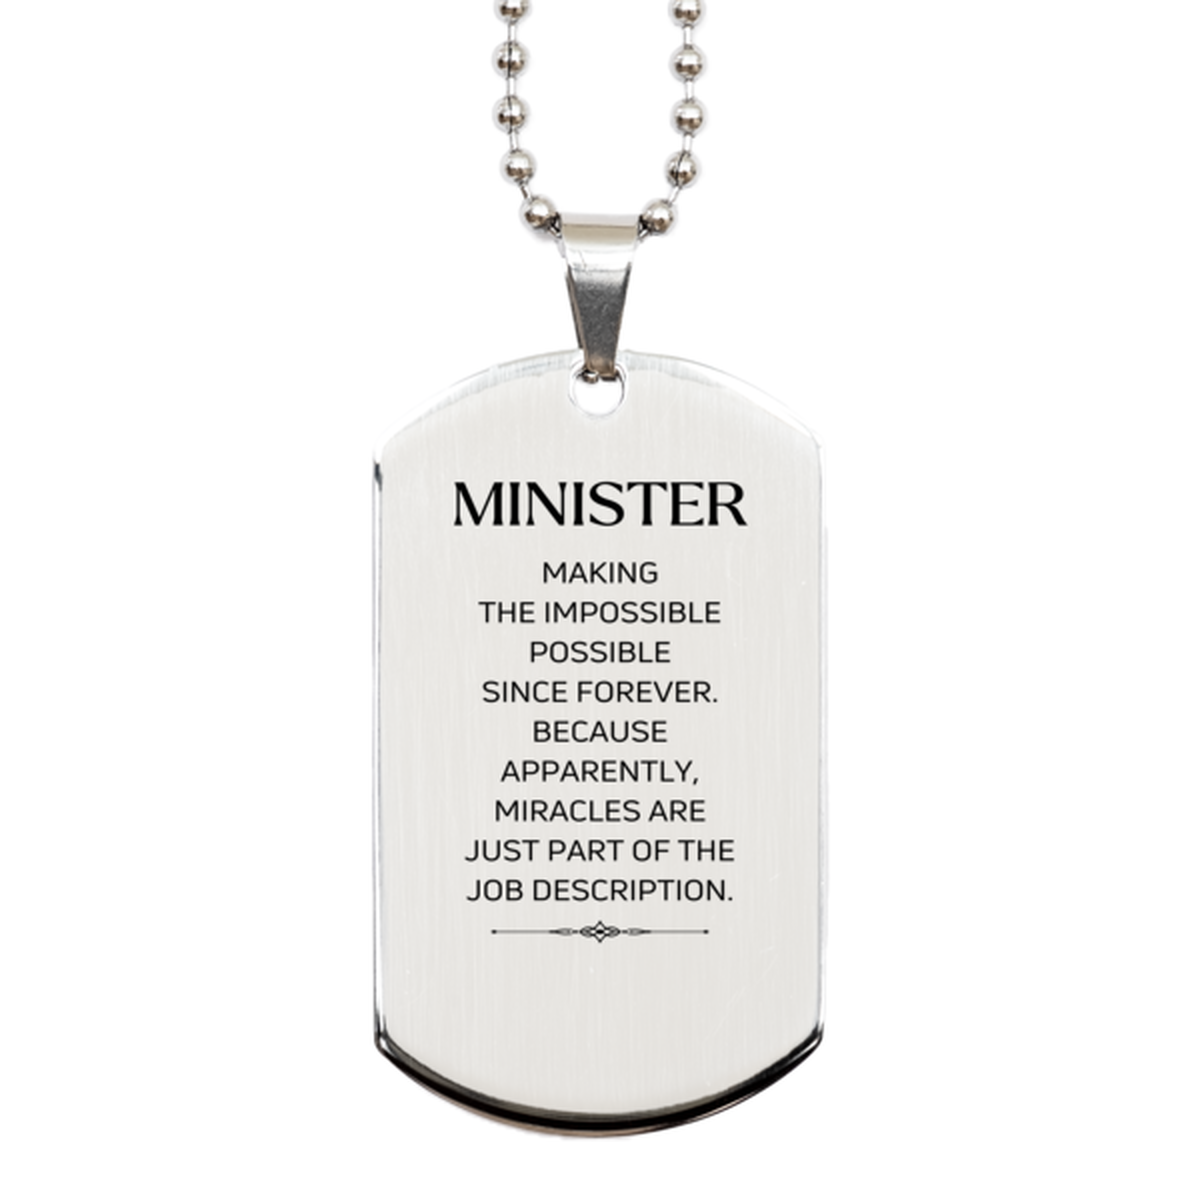 Funny Minister Gifts, Miracles are just part of the job description, Inspirational Birthday Silver Dog Tag For Minister, Men, Women, Coworkers, Friends, Boss